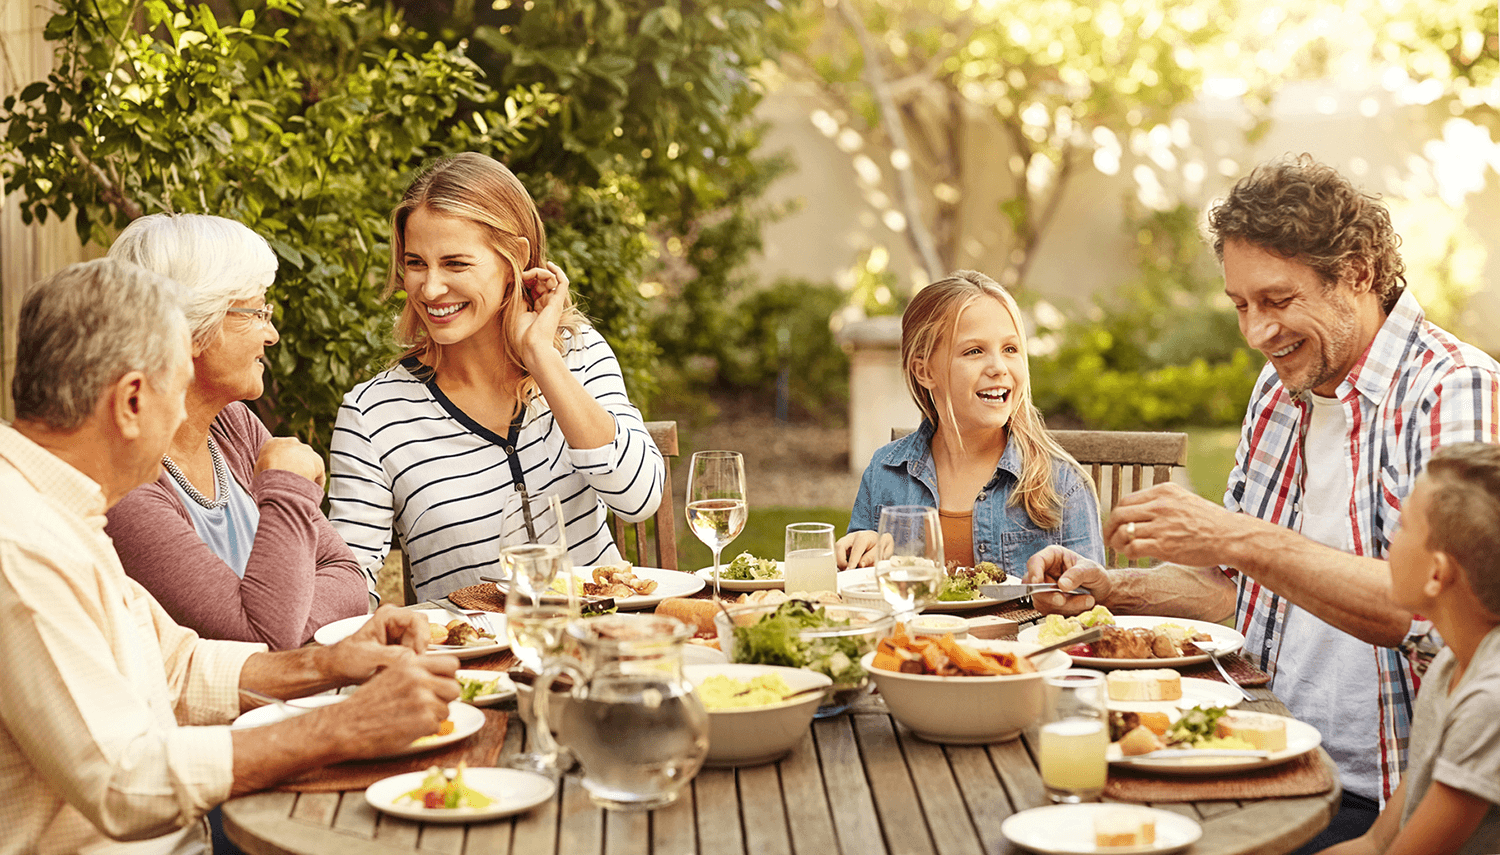 Family enjoying conversation together during dinner